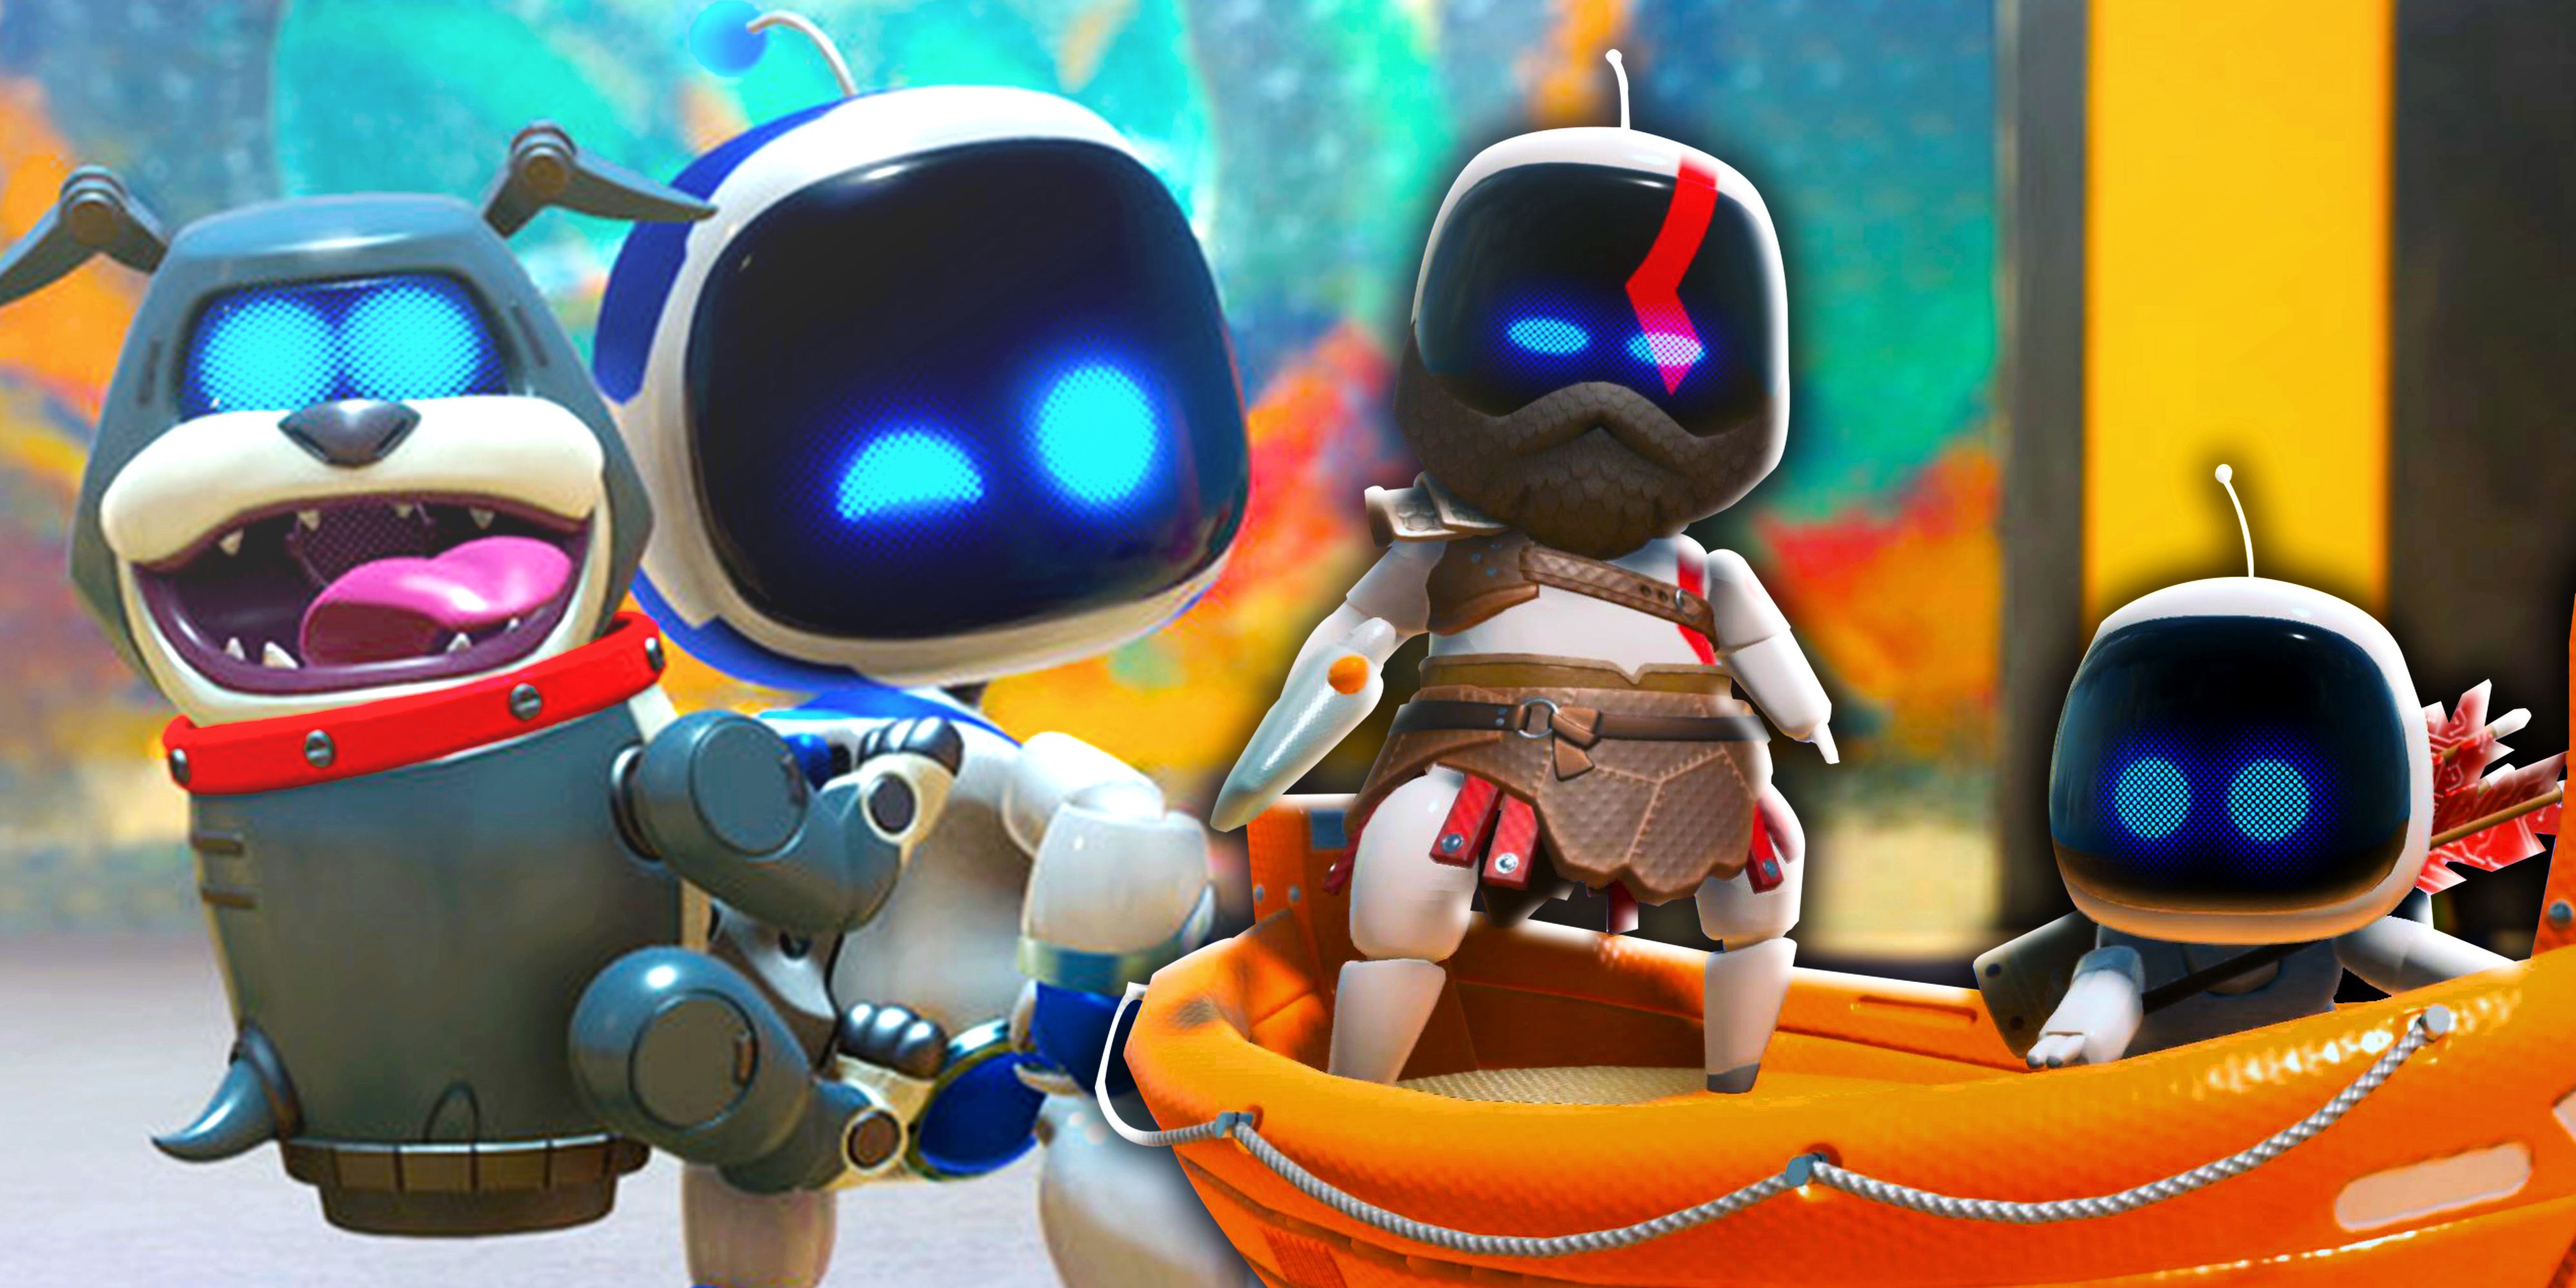 Various characters from Astro Bot, including one dressed like Kratos